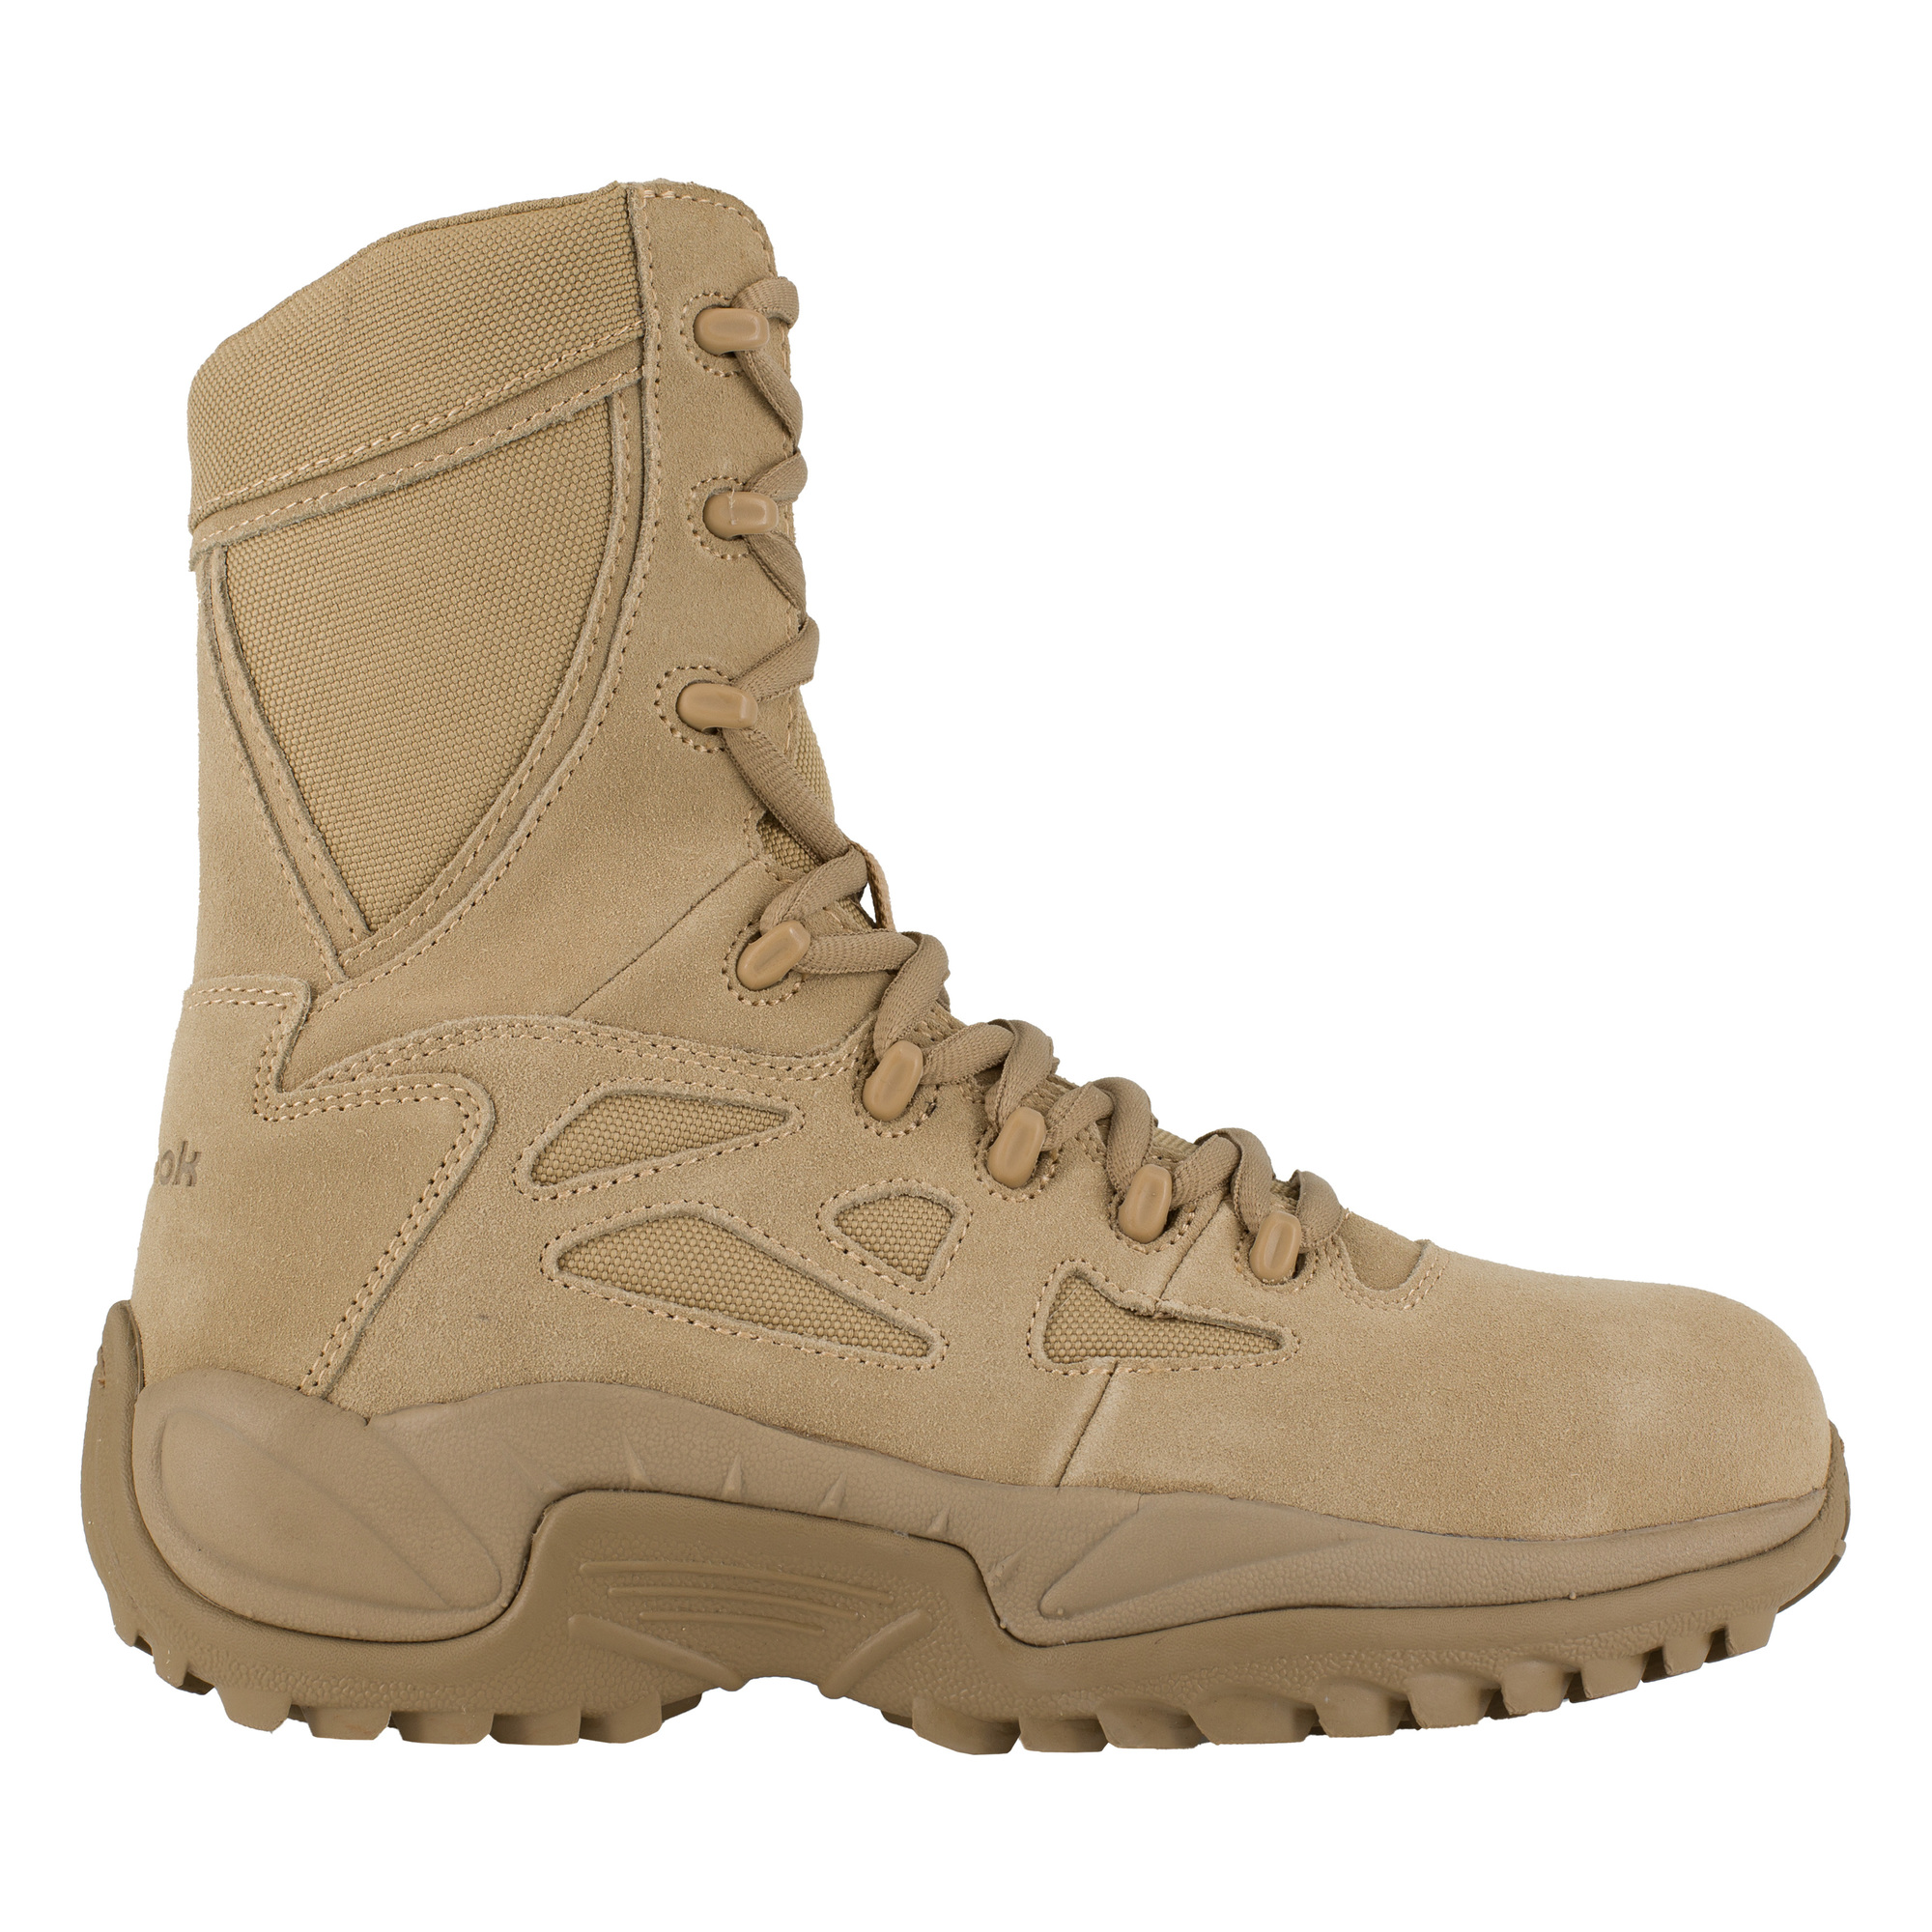 Reebok, 8Inch Stealth Tactical Boot with Side Zipper, Size 5, Width Wide, Color Desert Tan, Model RB894